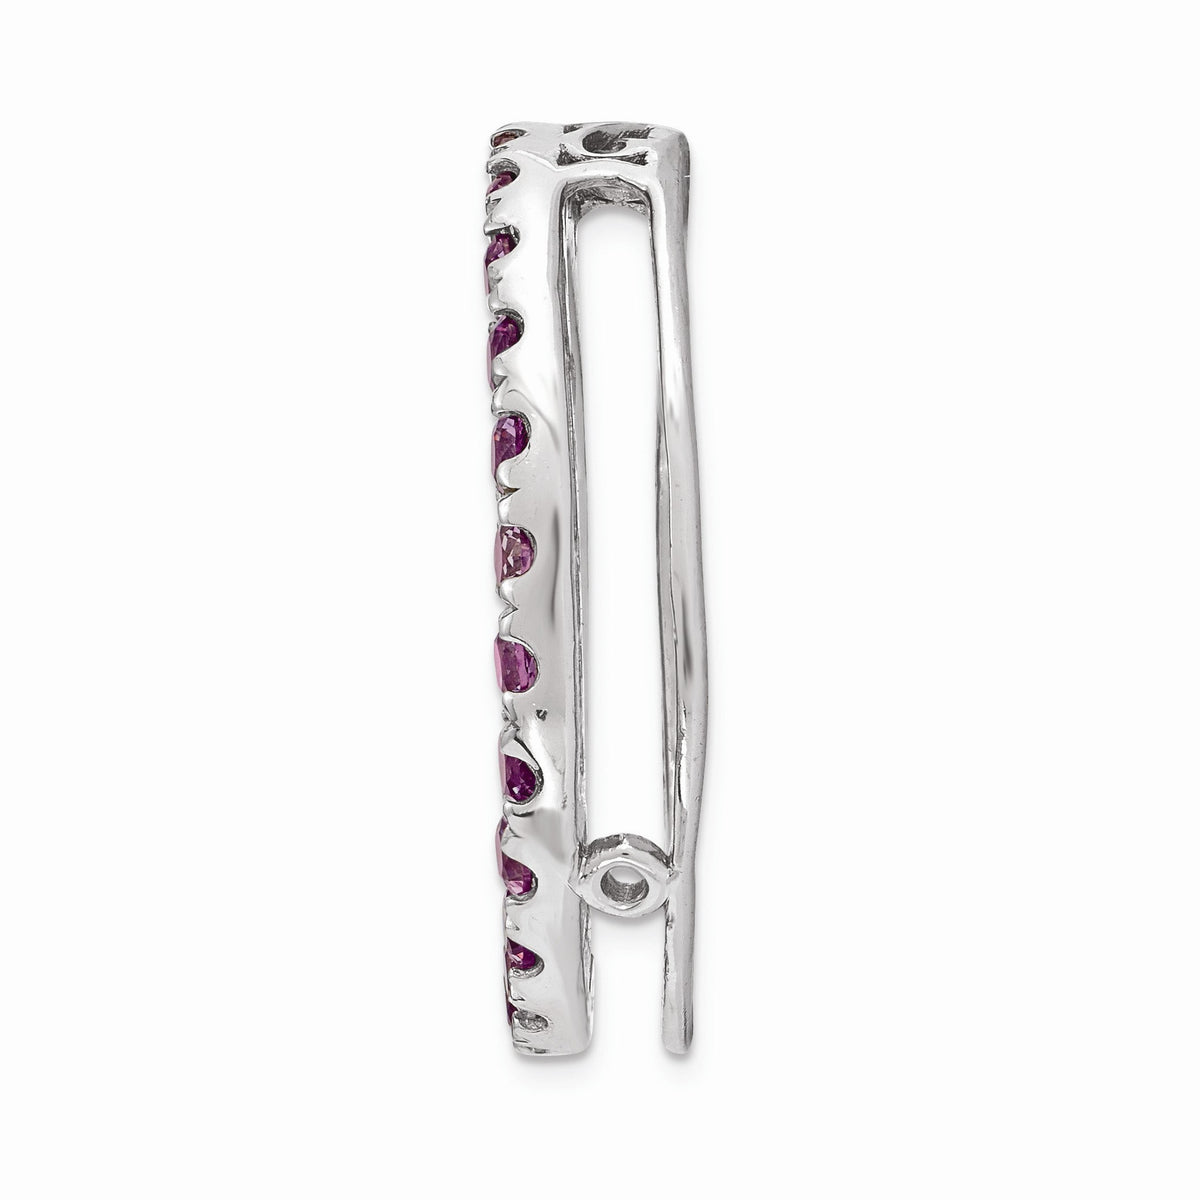 Alternate view of the Sterling Silver &amp; Rh. Garnet Stackable Expressions Medium Slide, 20mm by The Black Bow Jewelry Co.